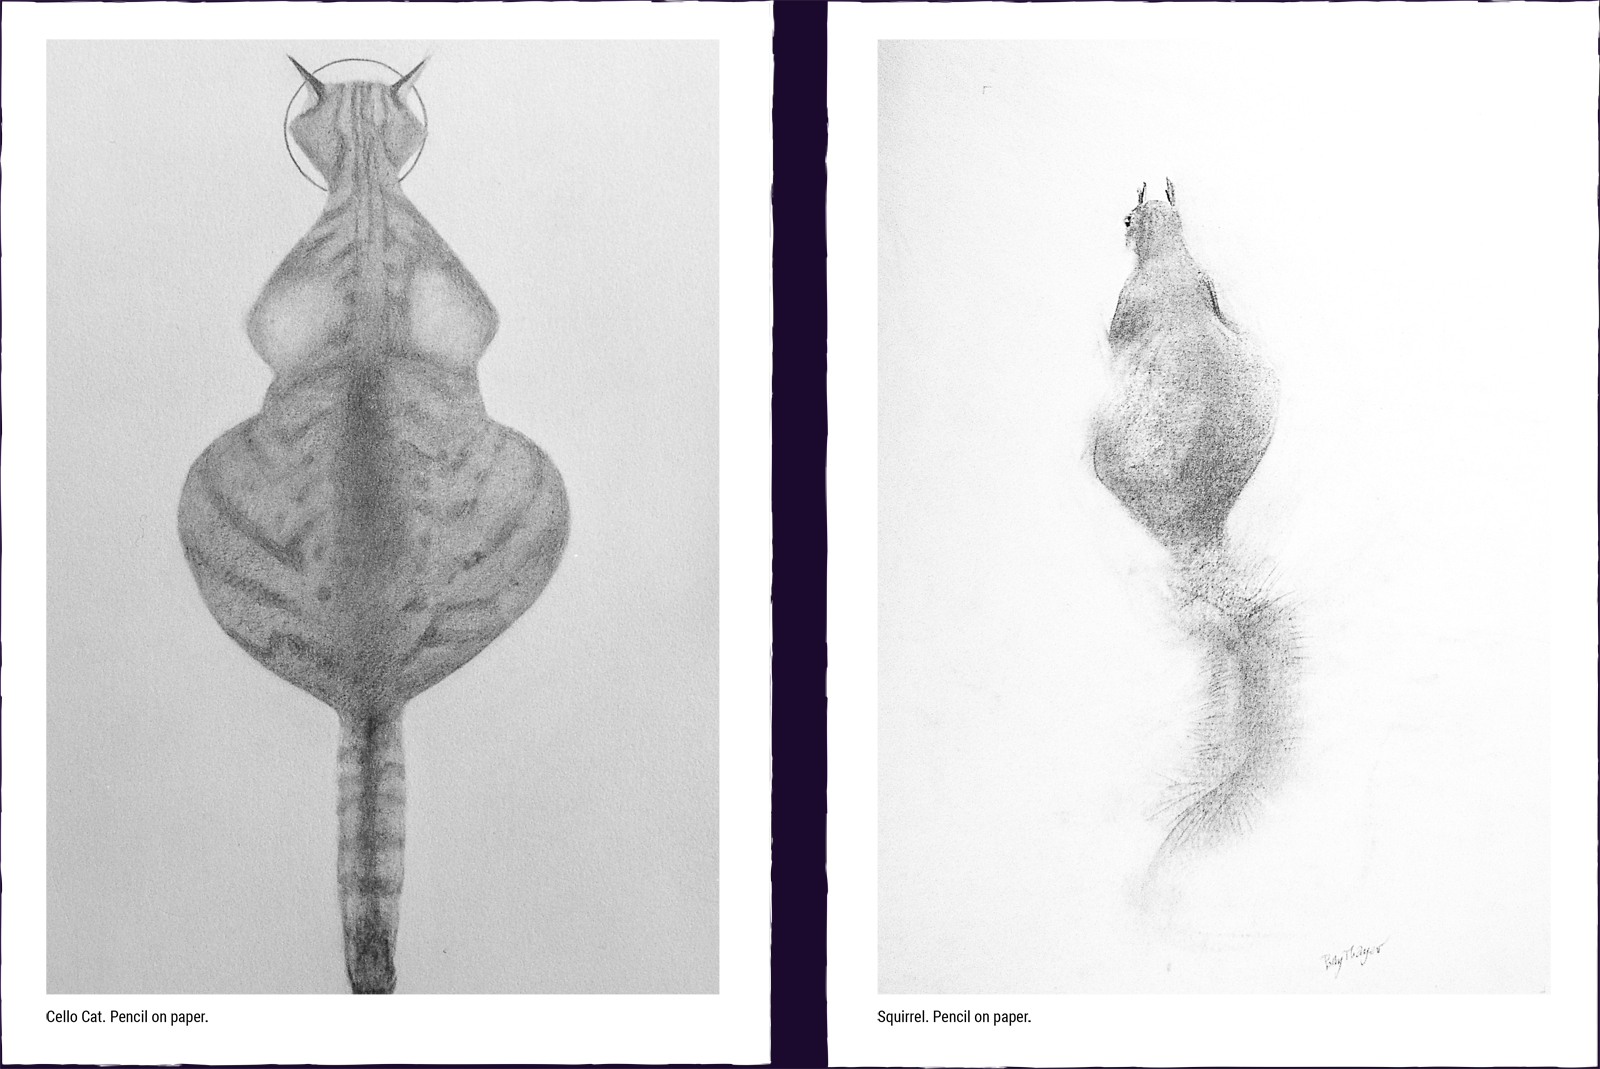 Two animal paintings. (1) Cello Cat. Pencil on paper. (2) Squirrel. Pencil on paper.